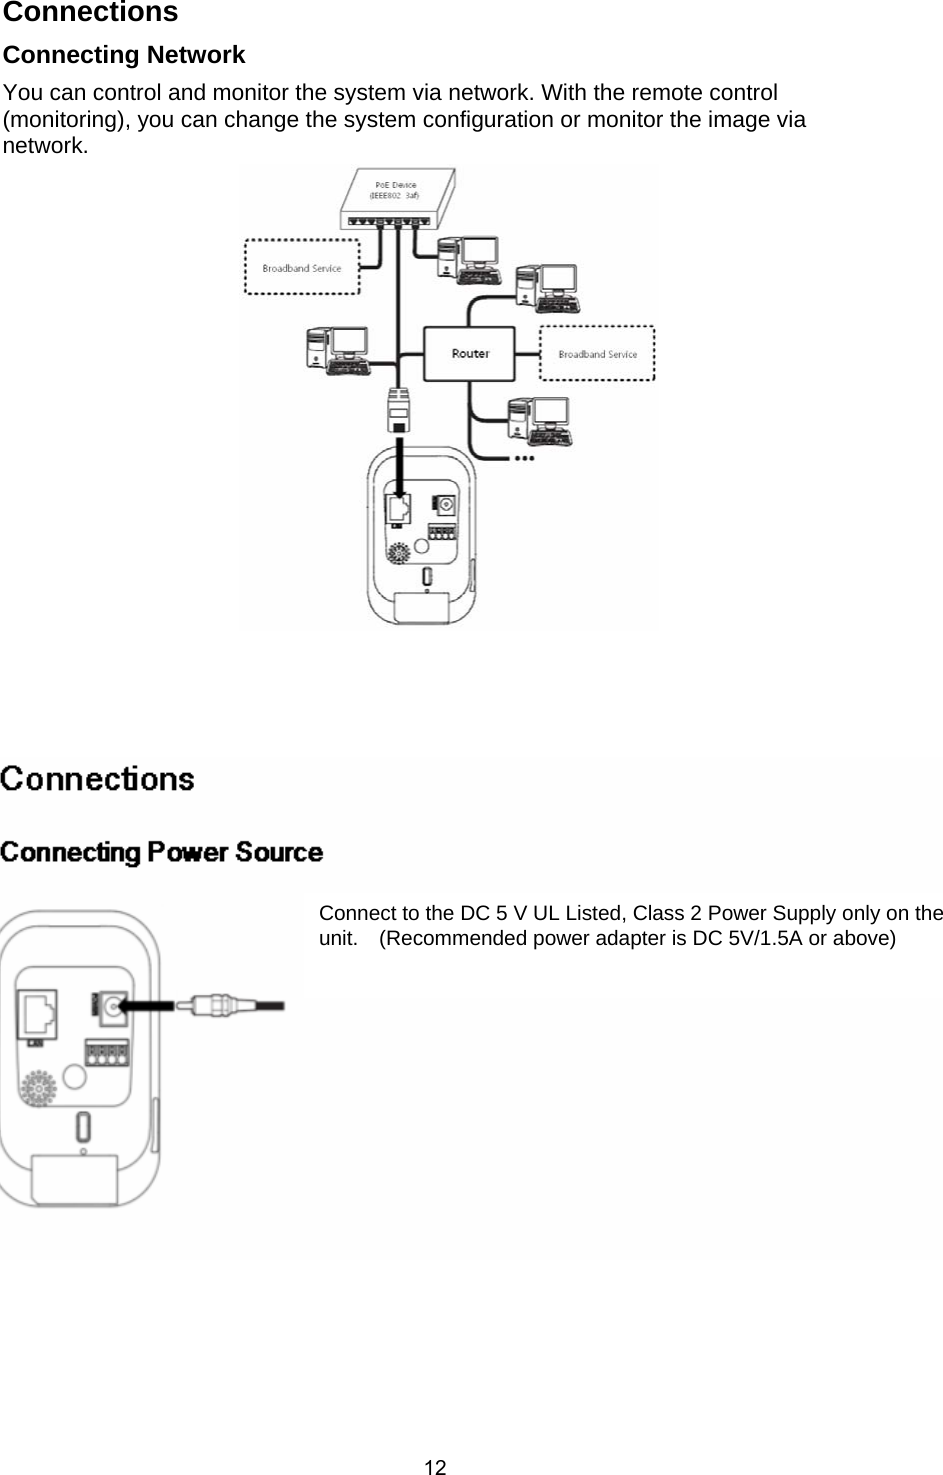  12Connections Connecting Network   You can control and monitor the system via network. With the remote control (monitoring), you can change the system configuration or monitor the image via network.              Connect to the DC 5 V UL Listed, Class 2 Power Supply only on the unit.    (Recommended power adapter is DC 5V/1.5A or above) 